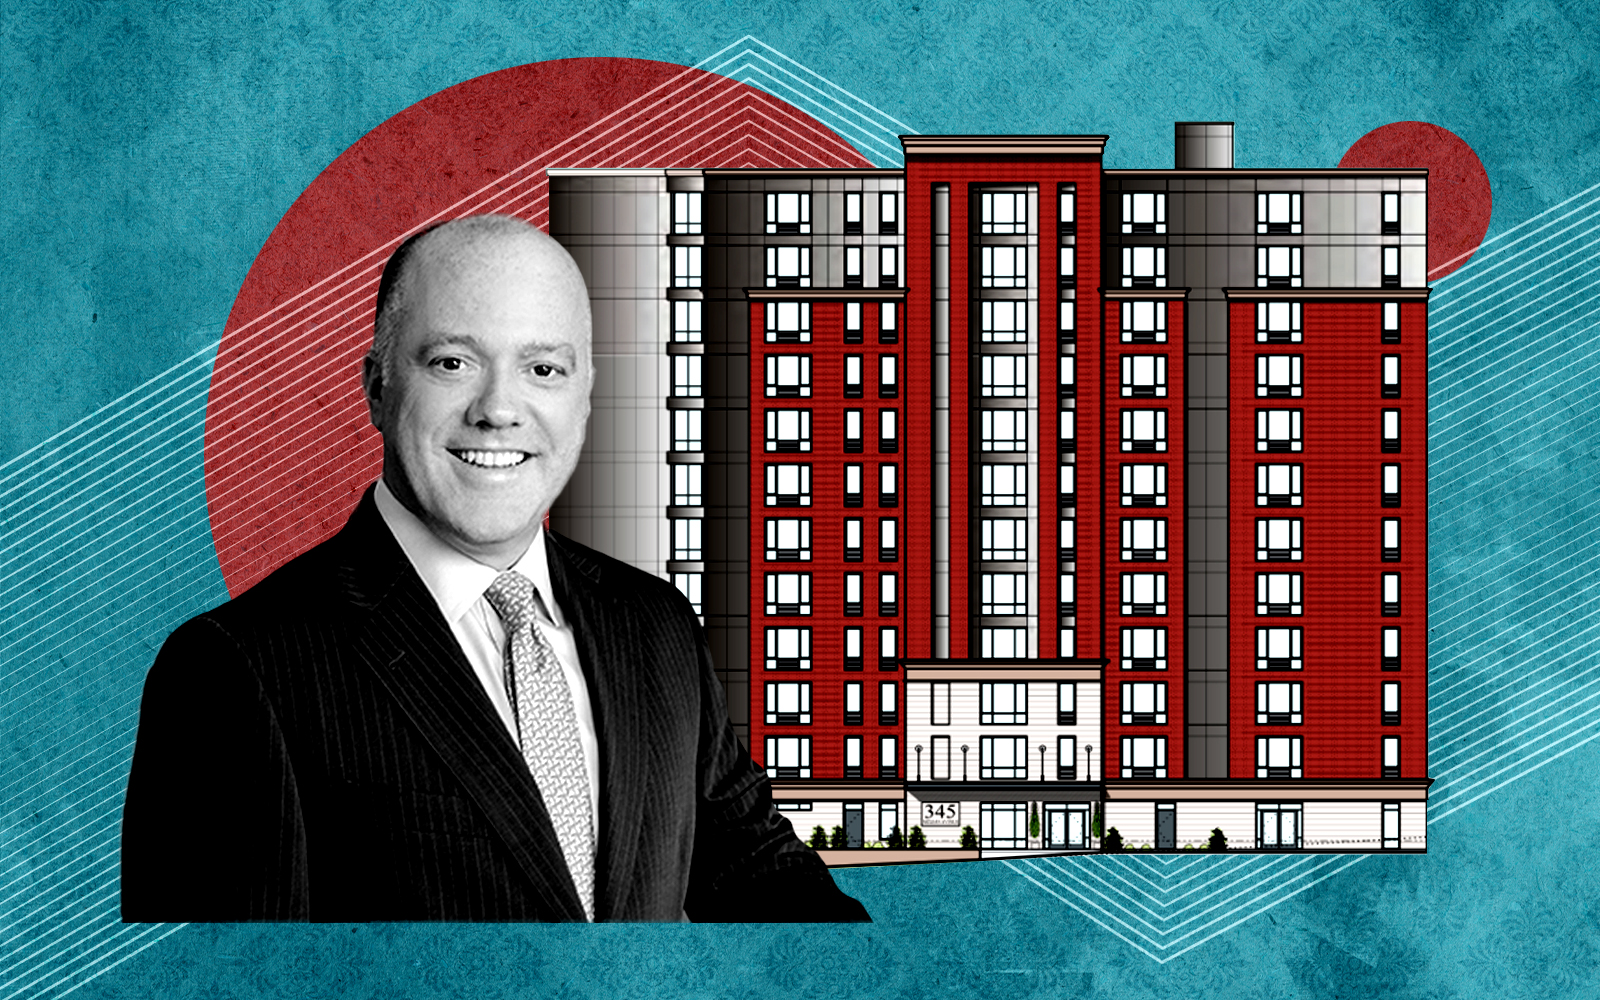 Senior housing in Yonkers, industrial leases: Tri-state roundup